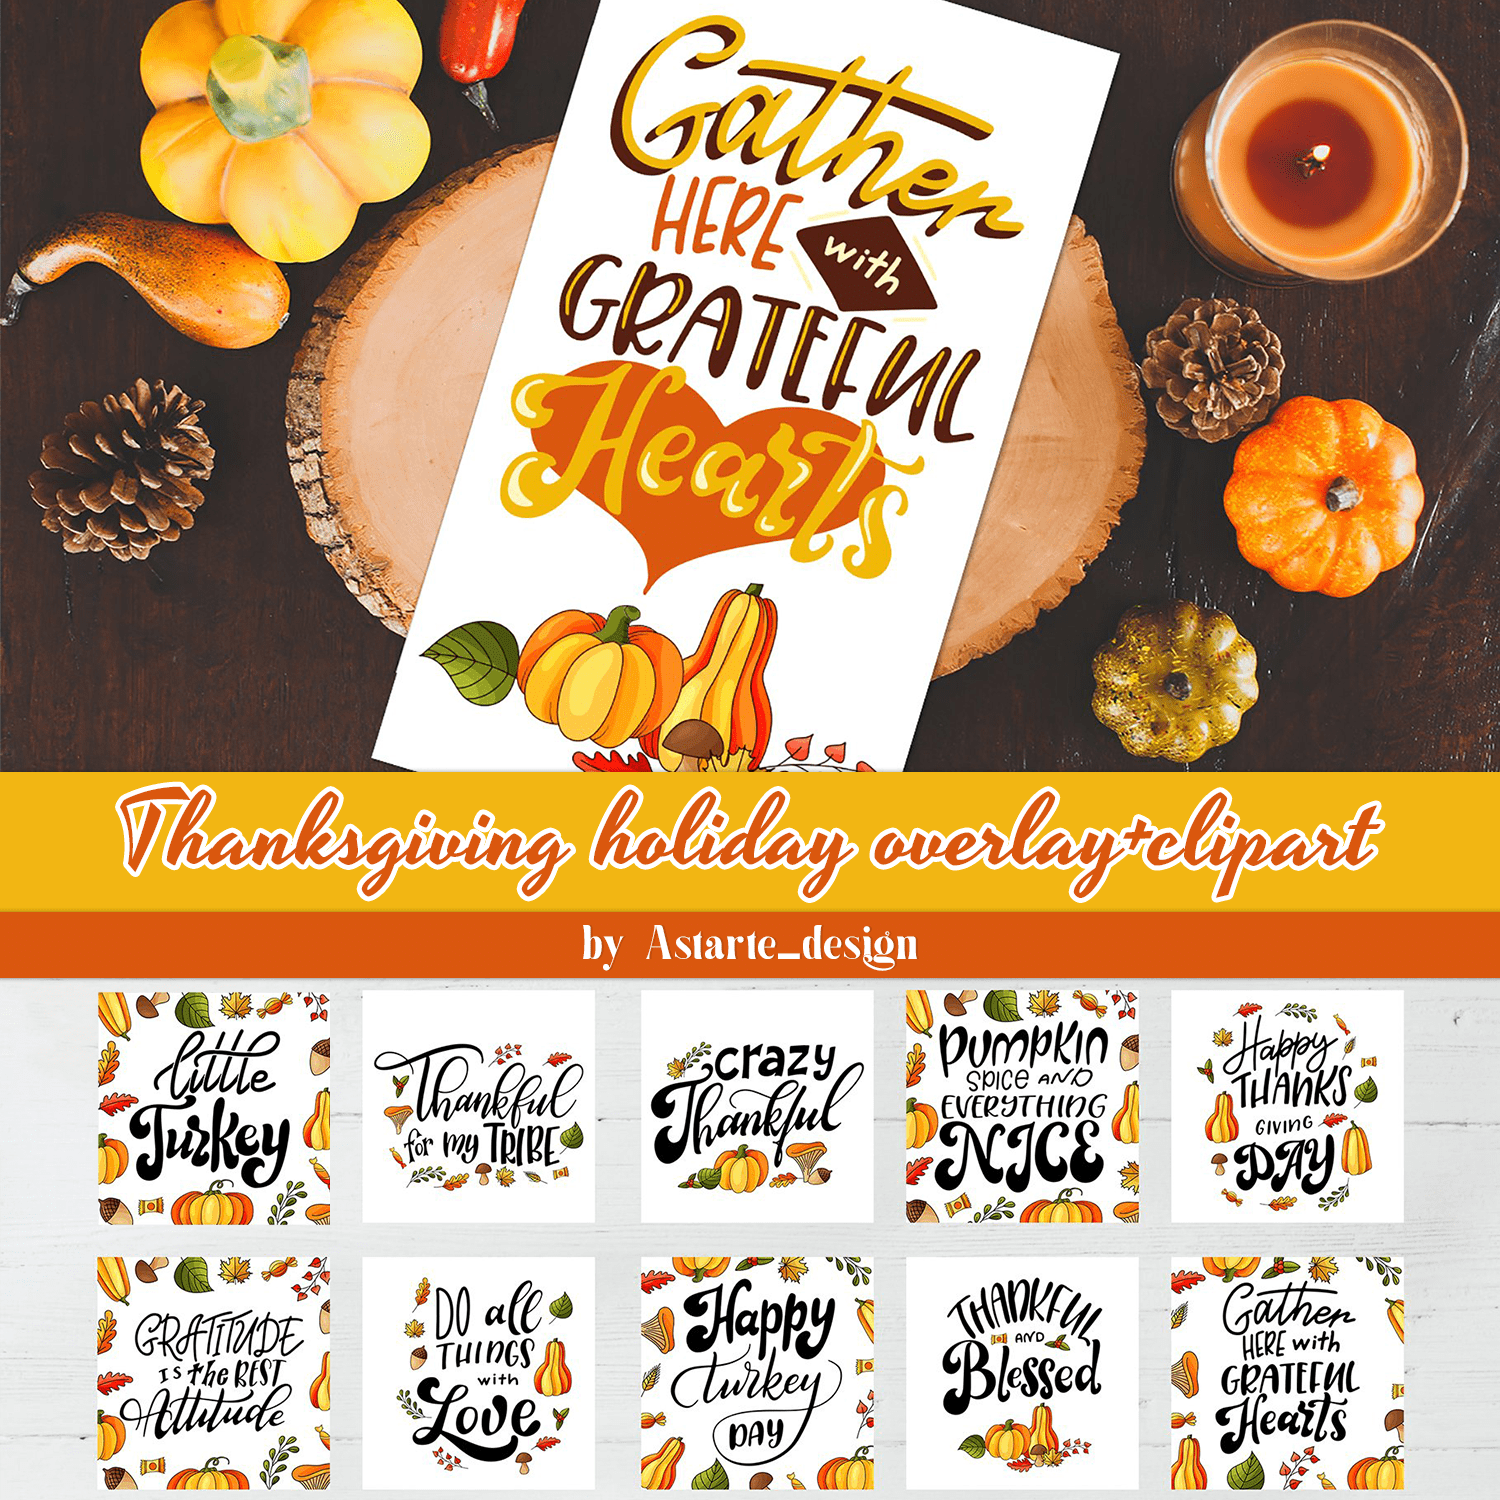 Thanksgiving holiday overlay+clipart cover.